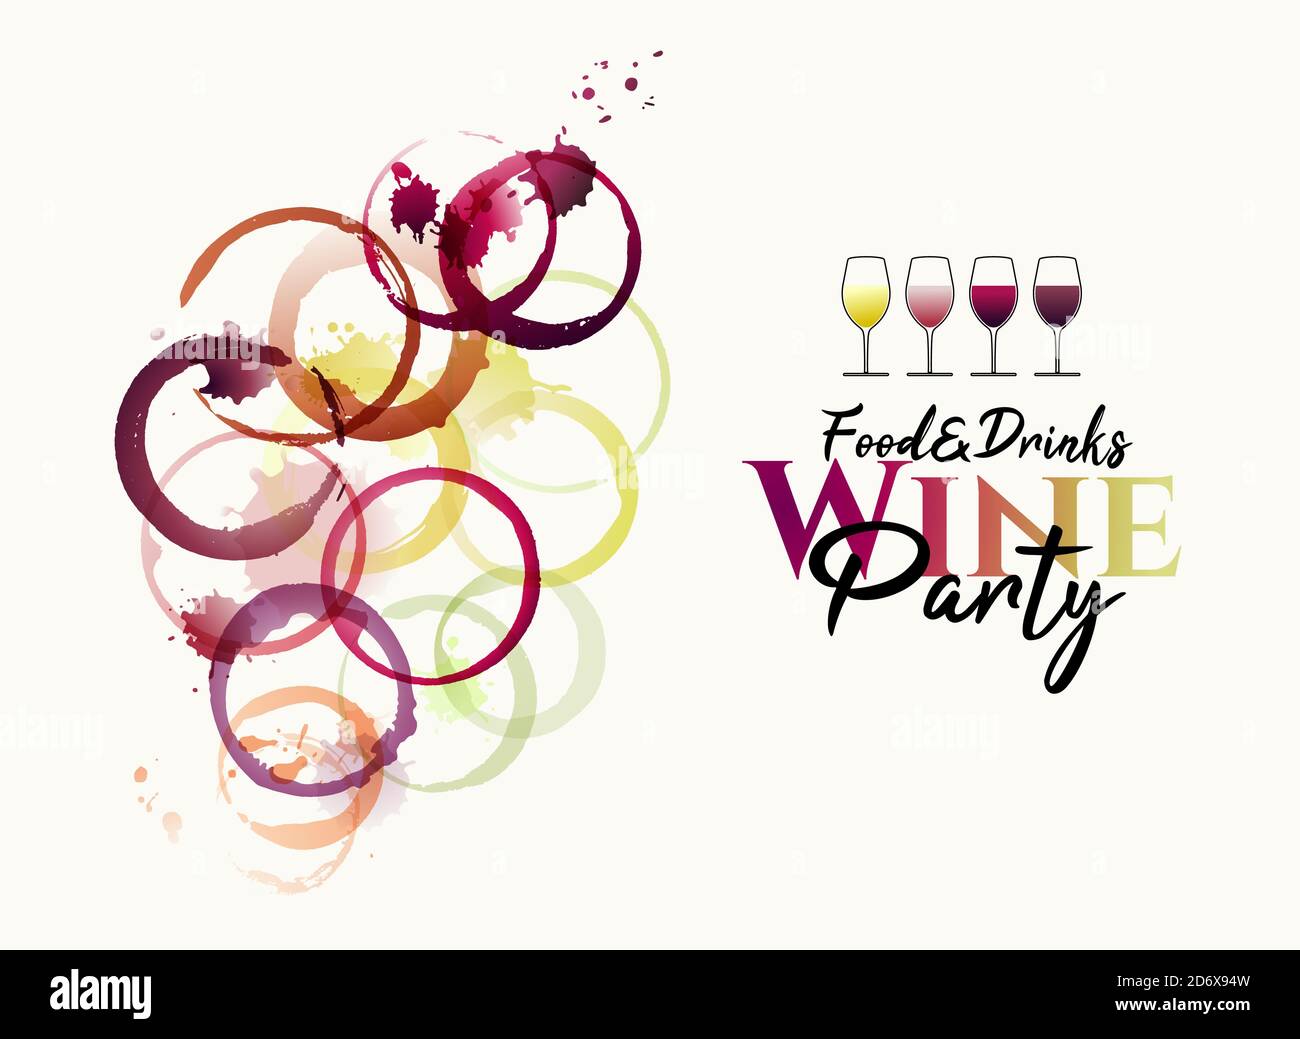 manchas de vino y marcas circulares de copas de vino.  Abstract illustration of grape cluster with different colored stains of pink, white and red win Stock Vector